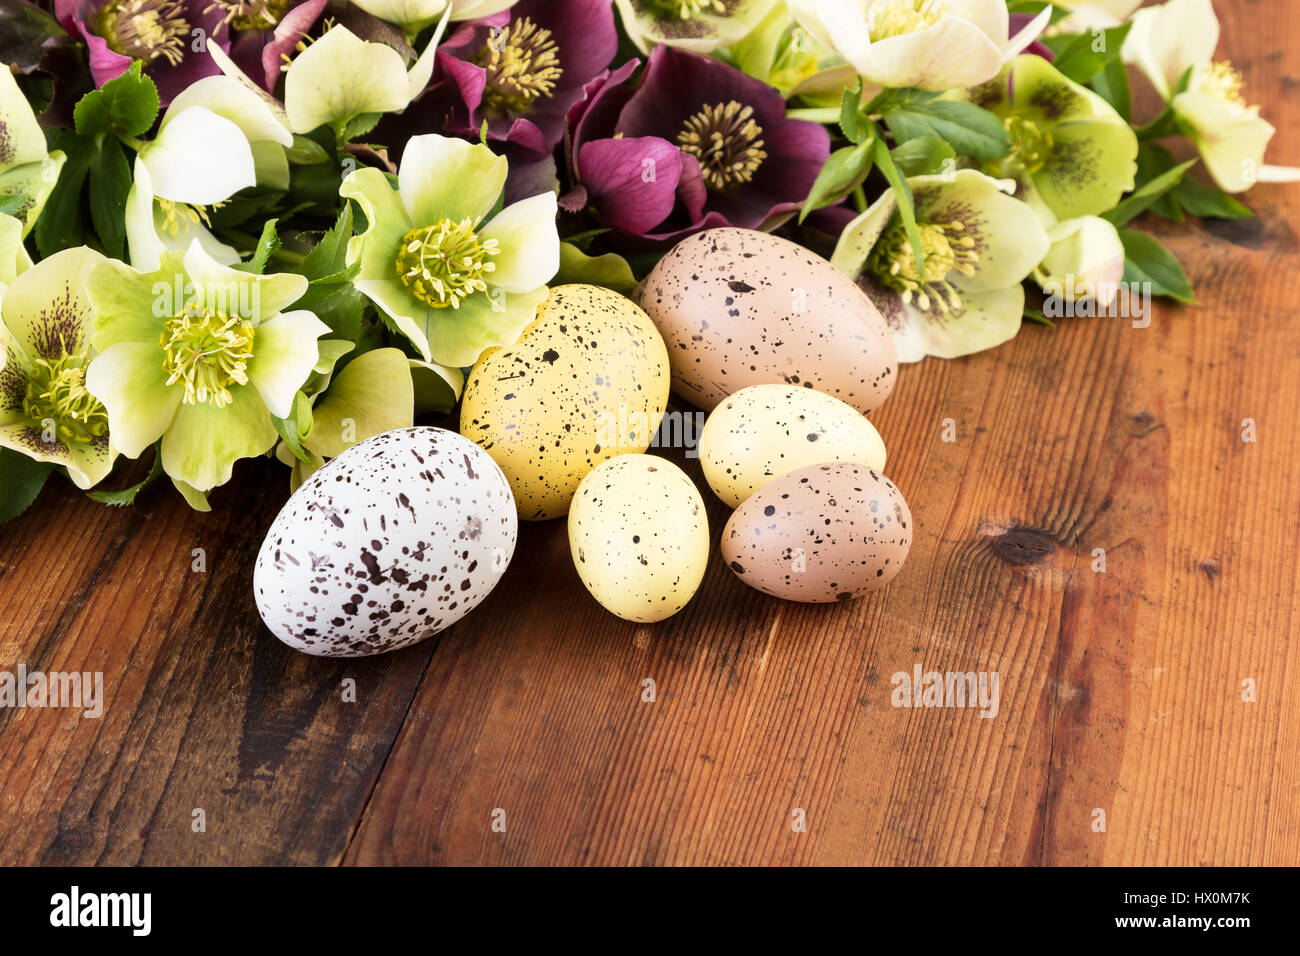 Easter Egg pastel color with spring flowers on natural wooden background. Purple and green Lenten roses closeup. Stock Photo